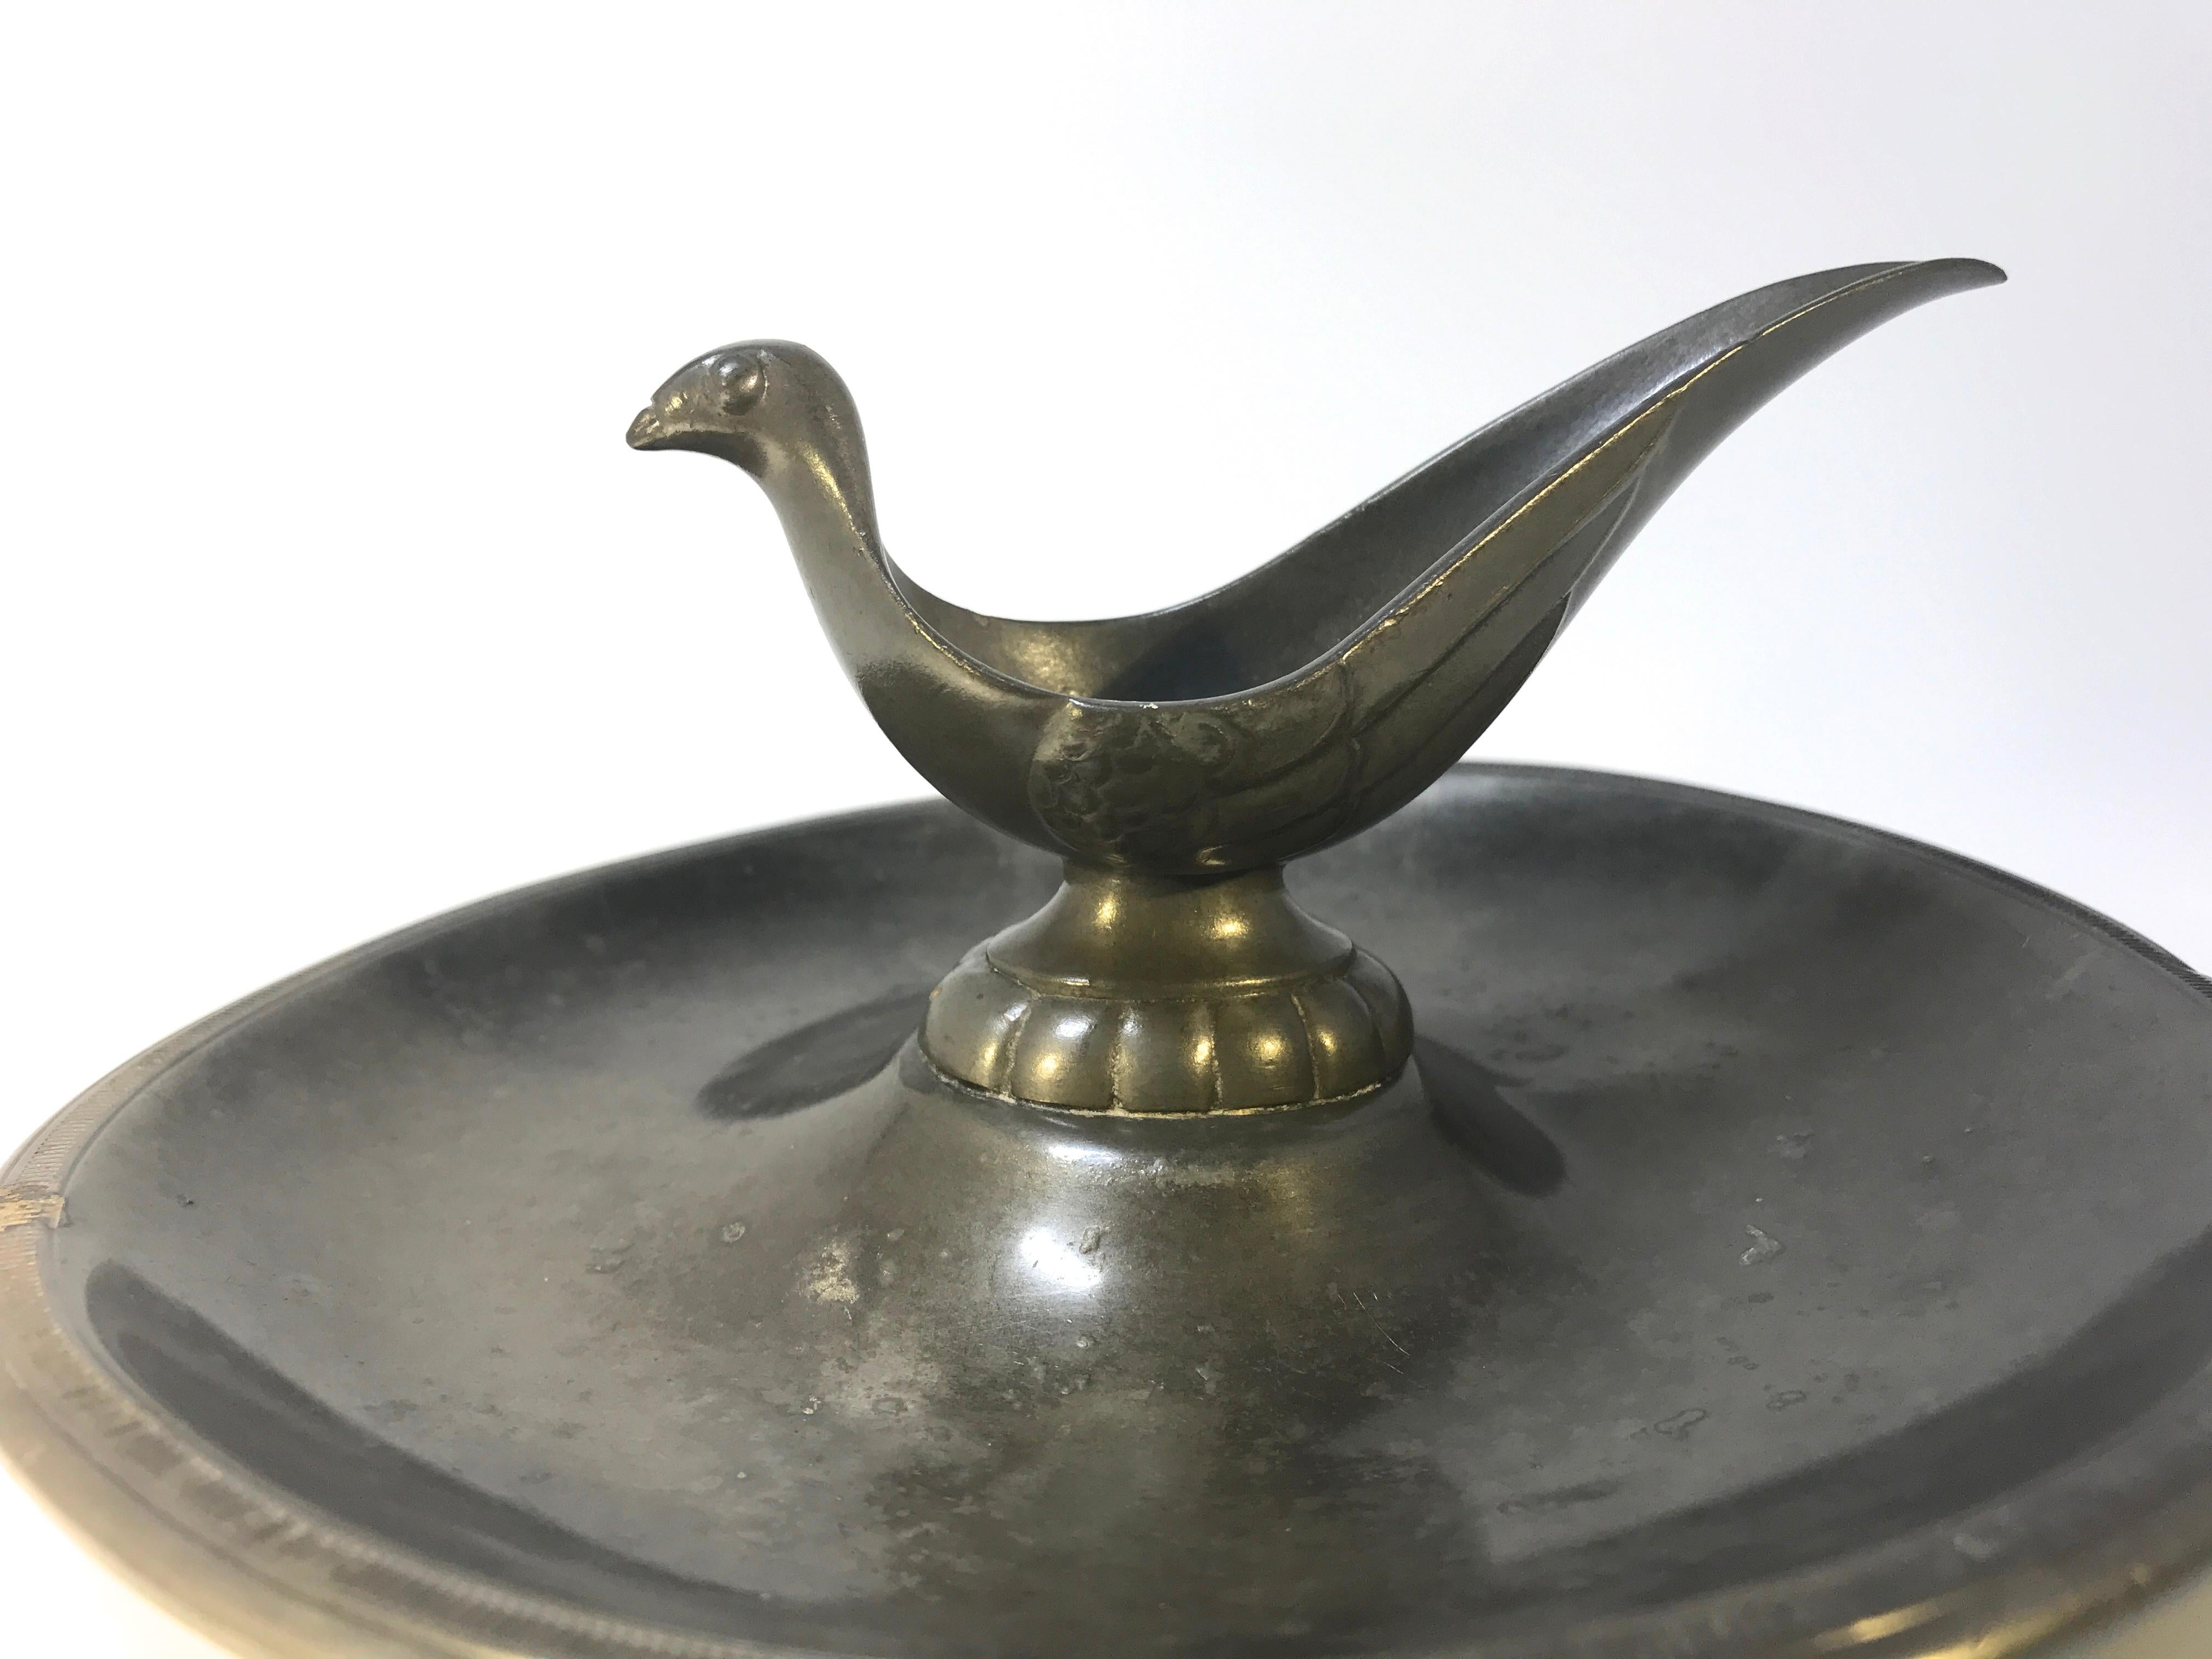 Just Andersen, Denmark 1930s Deco Pewter stylized bird pipe holder ashtray #2062
Stamped and numbered 2062 on base
Measures: Diameter 7 inch, height 3.5 inch
Good condition for it's age. Small pitting on tray as shown in photograph.
   
    